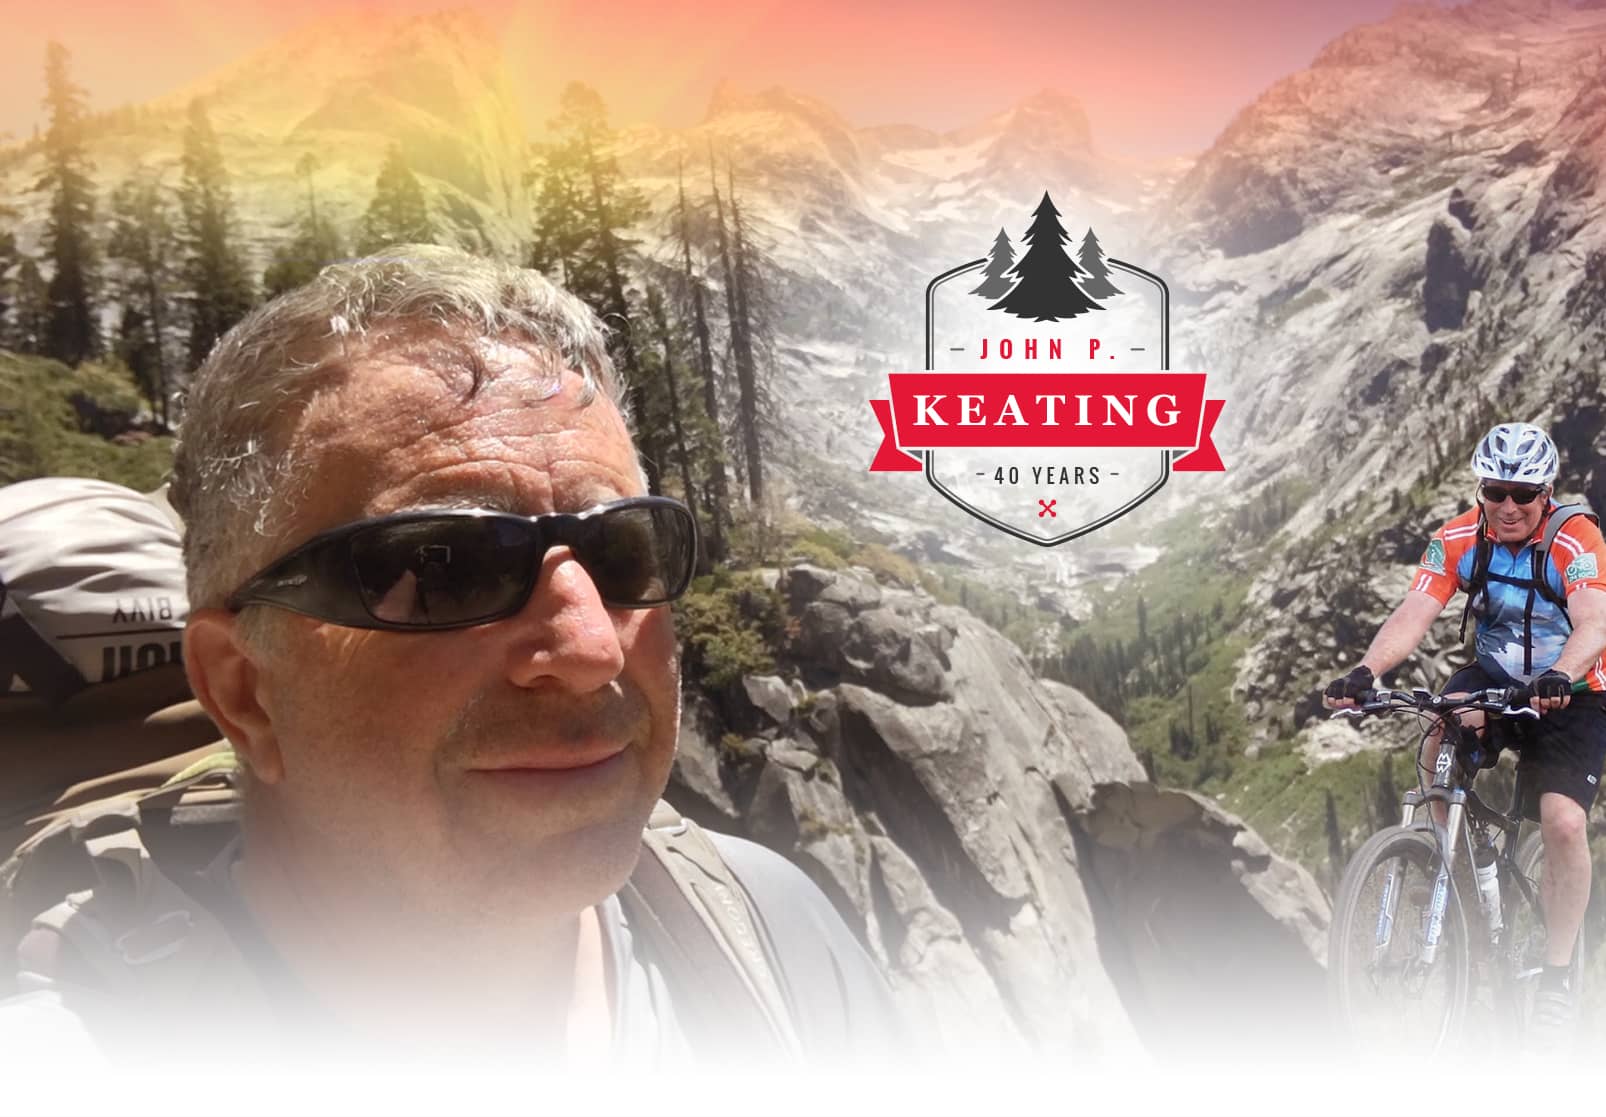 John P. Keating - Retires from LLG after 40 Years